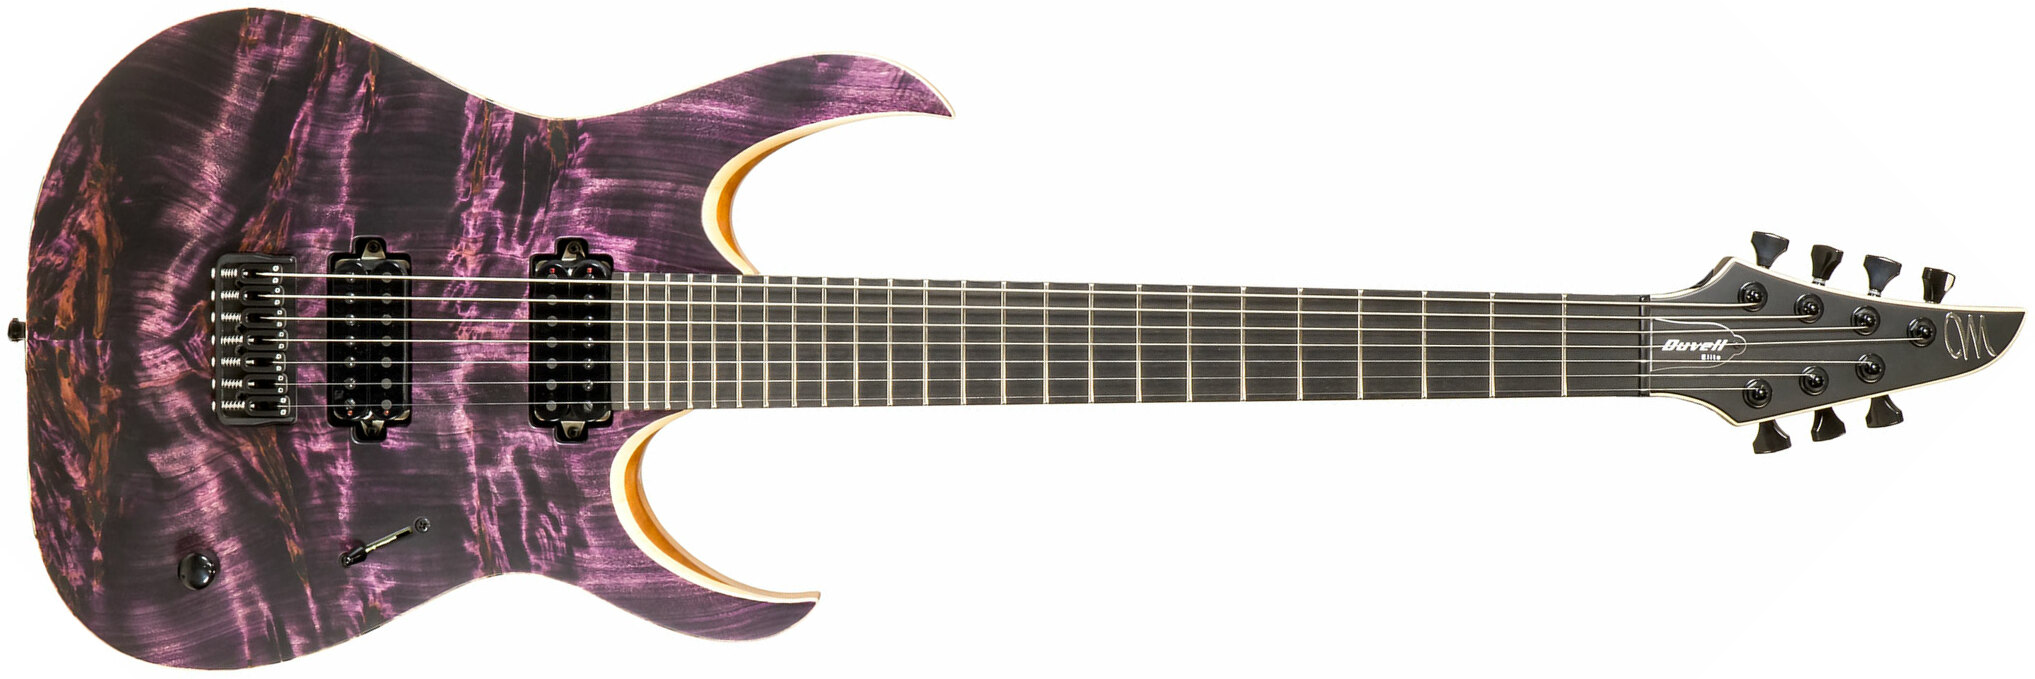 Mayones Guitars Duvell Elite 7c 2h Seymour Duncan Ht Eb #df2009194 - Dirty Purple - 7 string electric guitar - Main picture